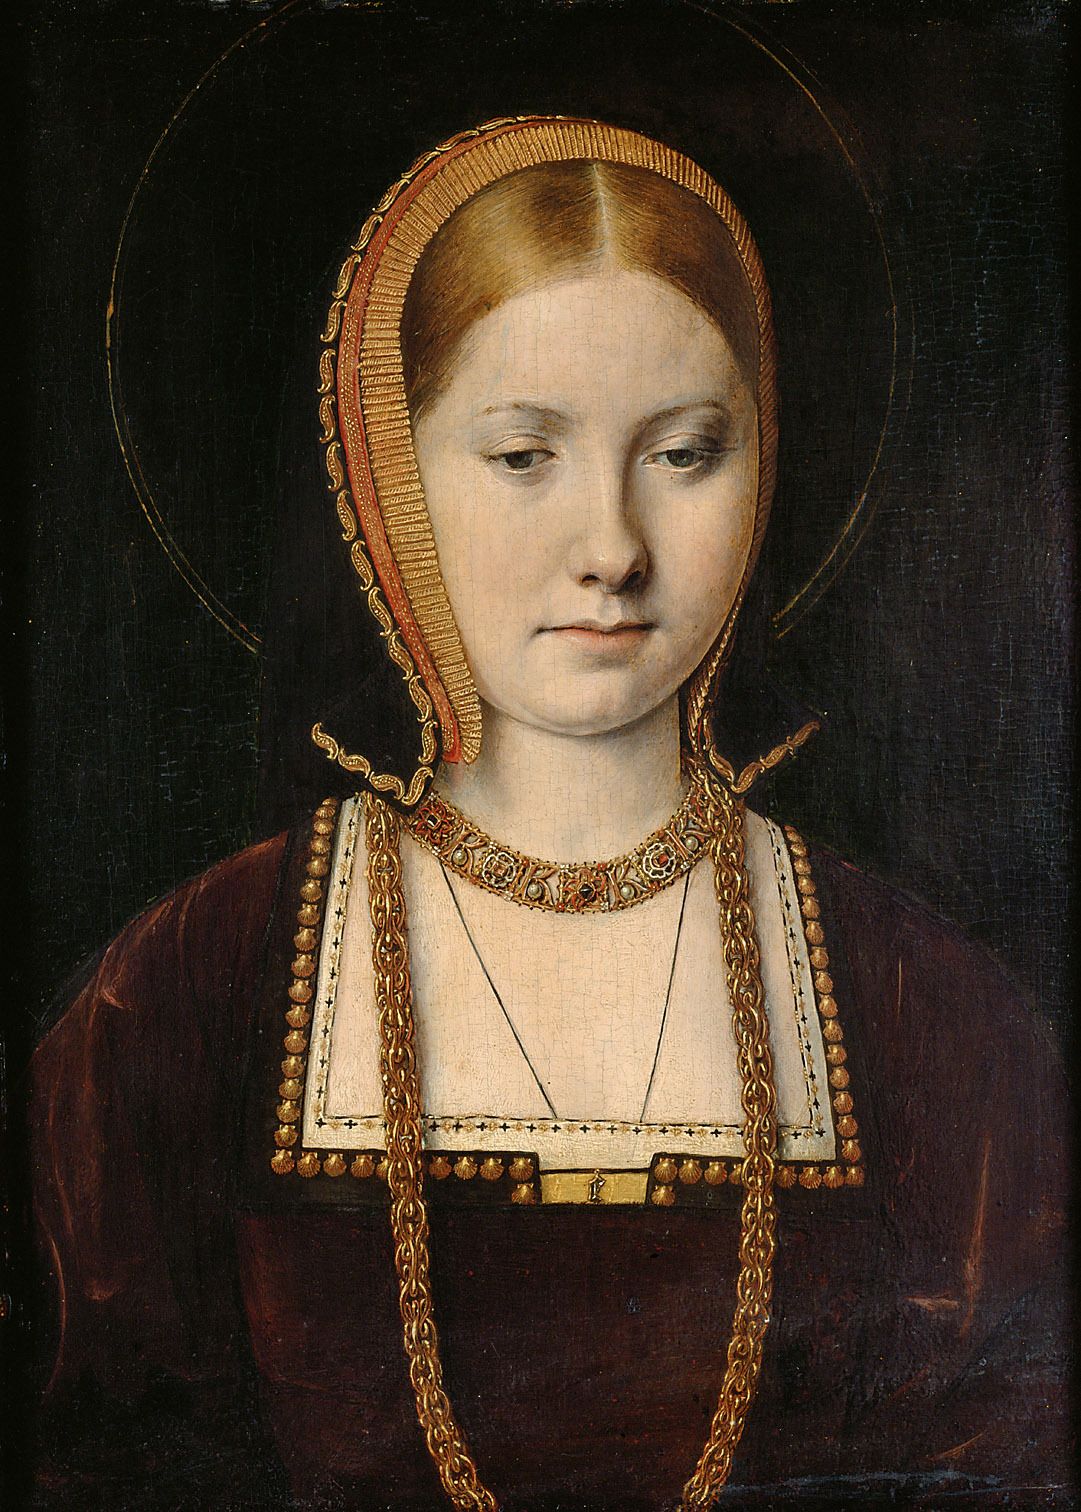 The ‘K’ on the necklace possibly stand for “Katherine” of Aragon (first wife of Henry VIII) or some historians think the portrait is of Mary Rose Tudor (youngest sister of Henry VIII) in which case the ‘K’ would stand for “Karolus” for Charles, the future Holy Roman Emperor to whom she was betrothed by Michel Sittow, c. 1514. 